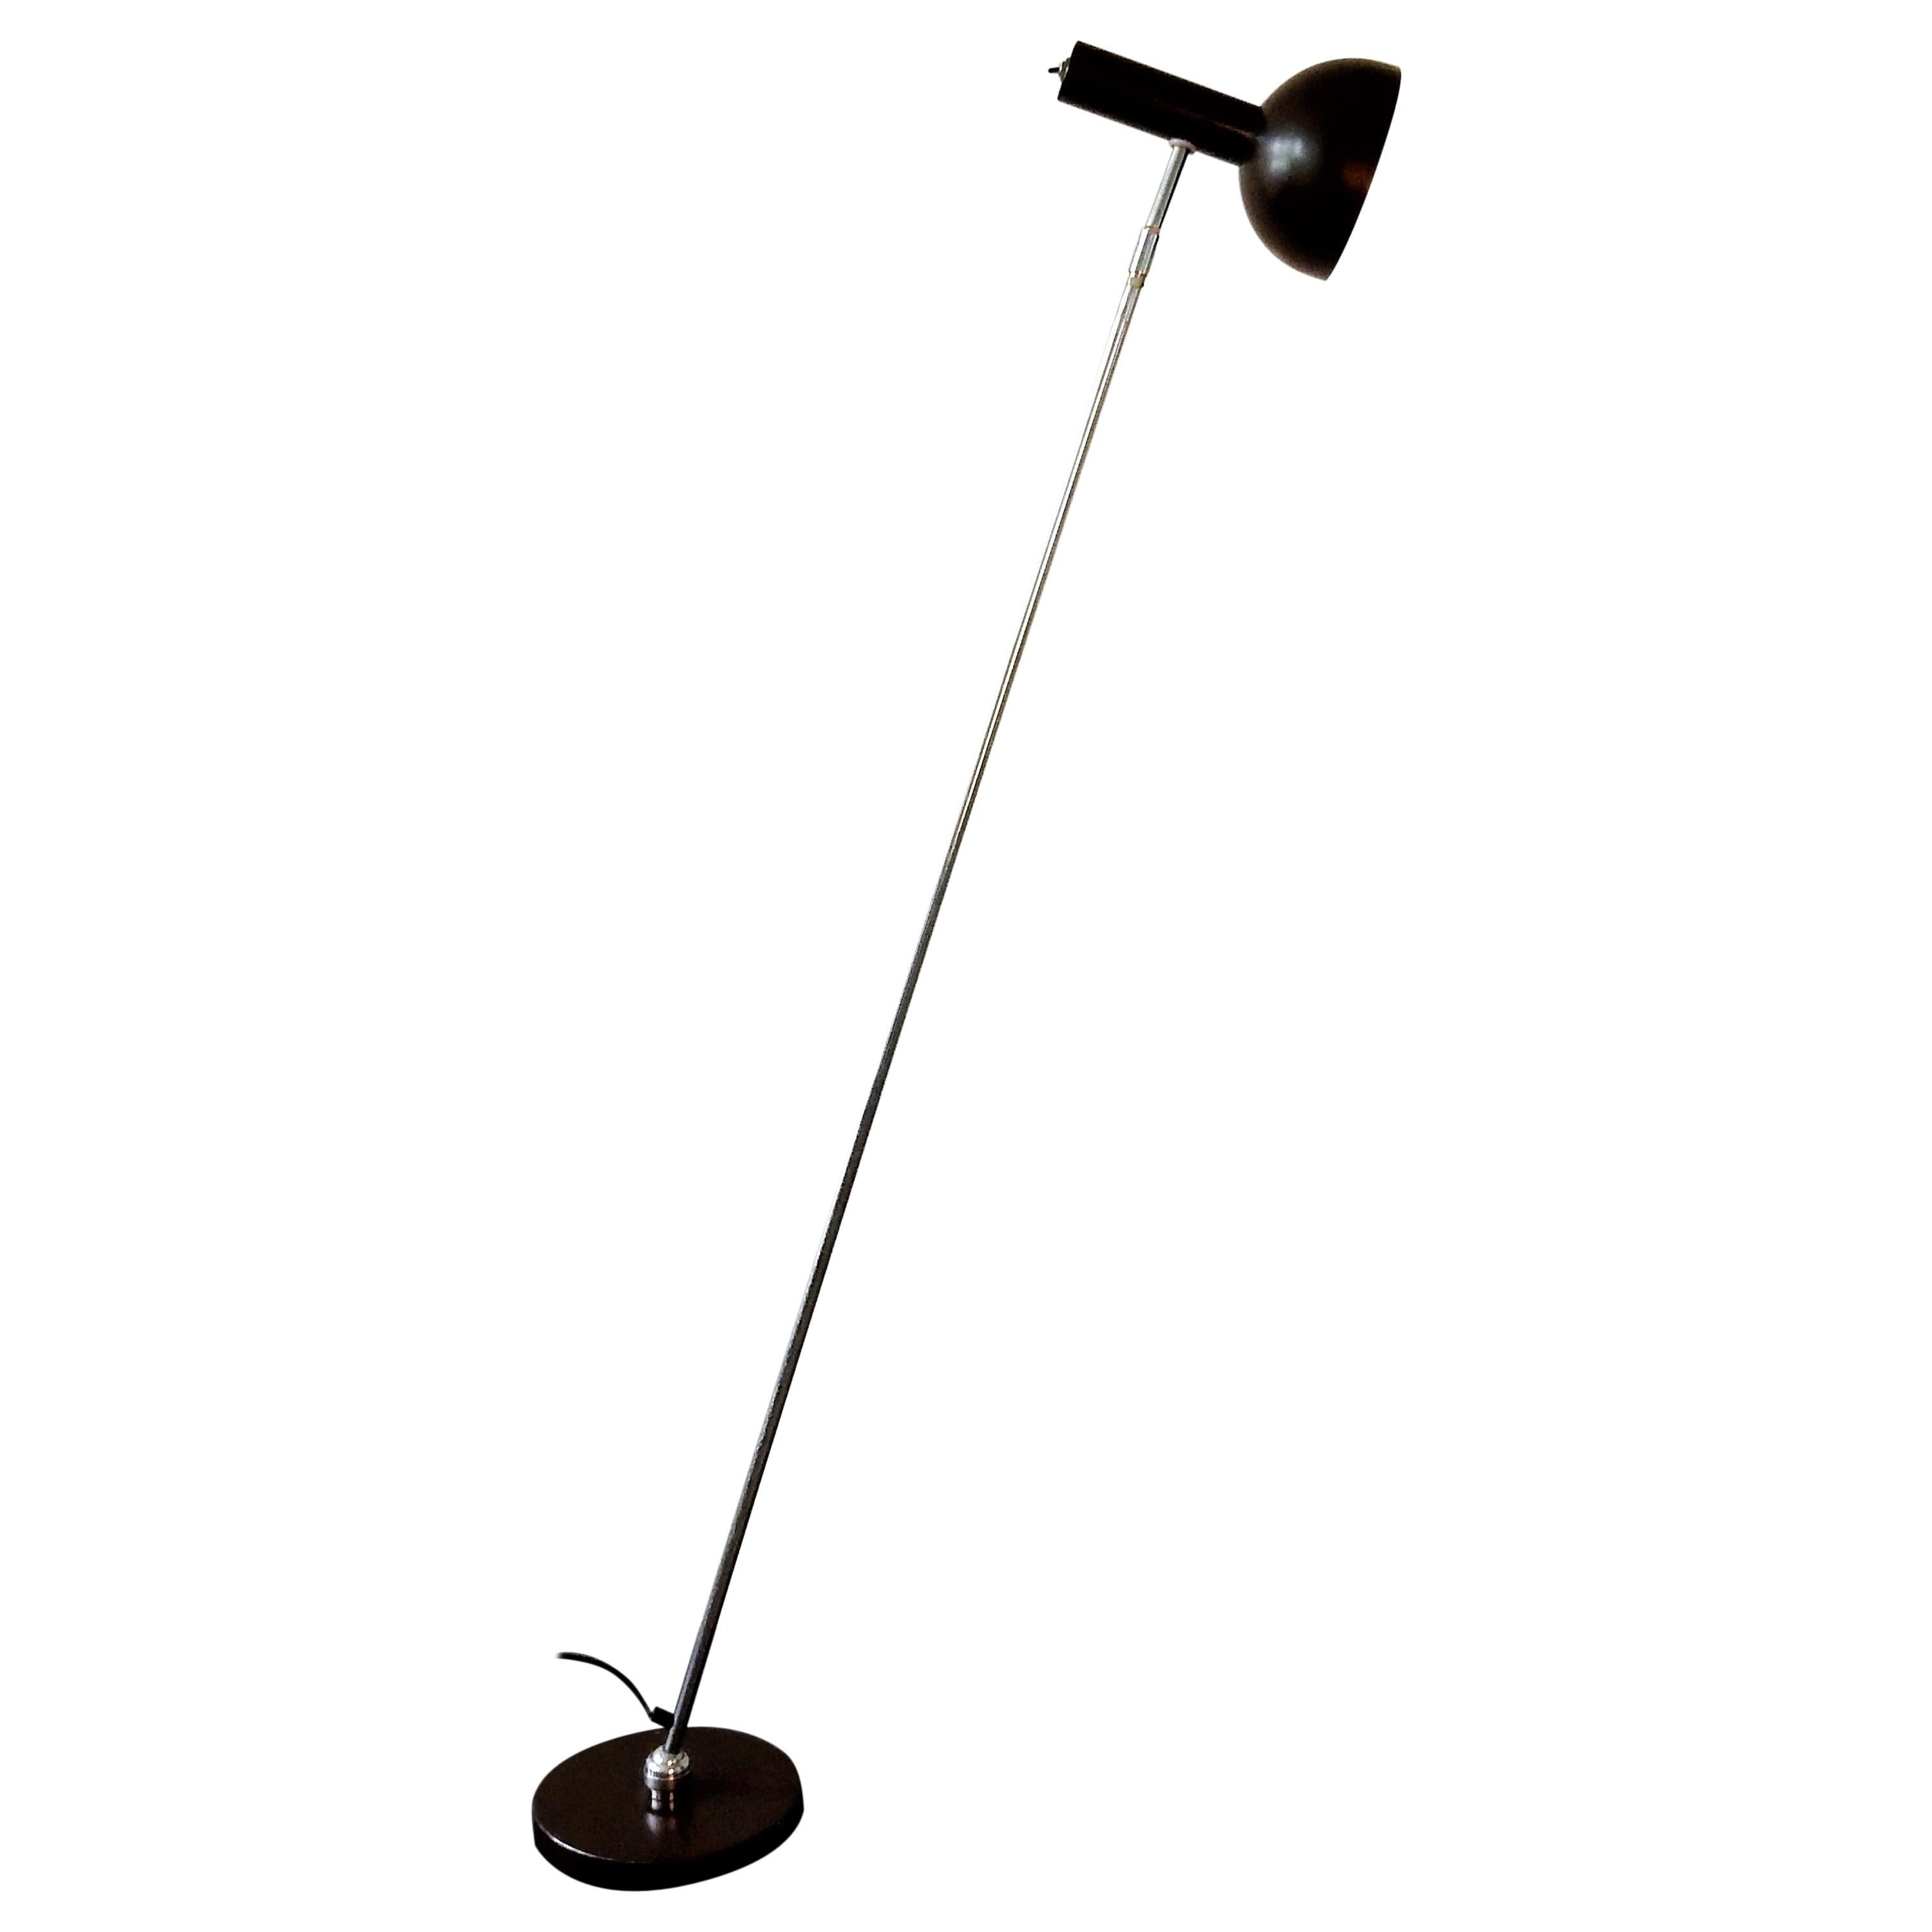 ‘Ball in socket’ Floor Lamp by H. Busquet for Hala Zeist, the Netherlands, 1960s For Sale